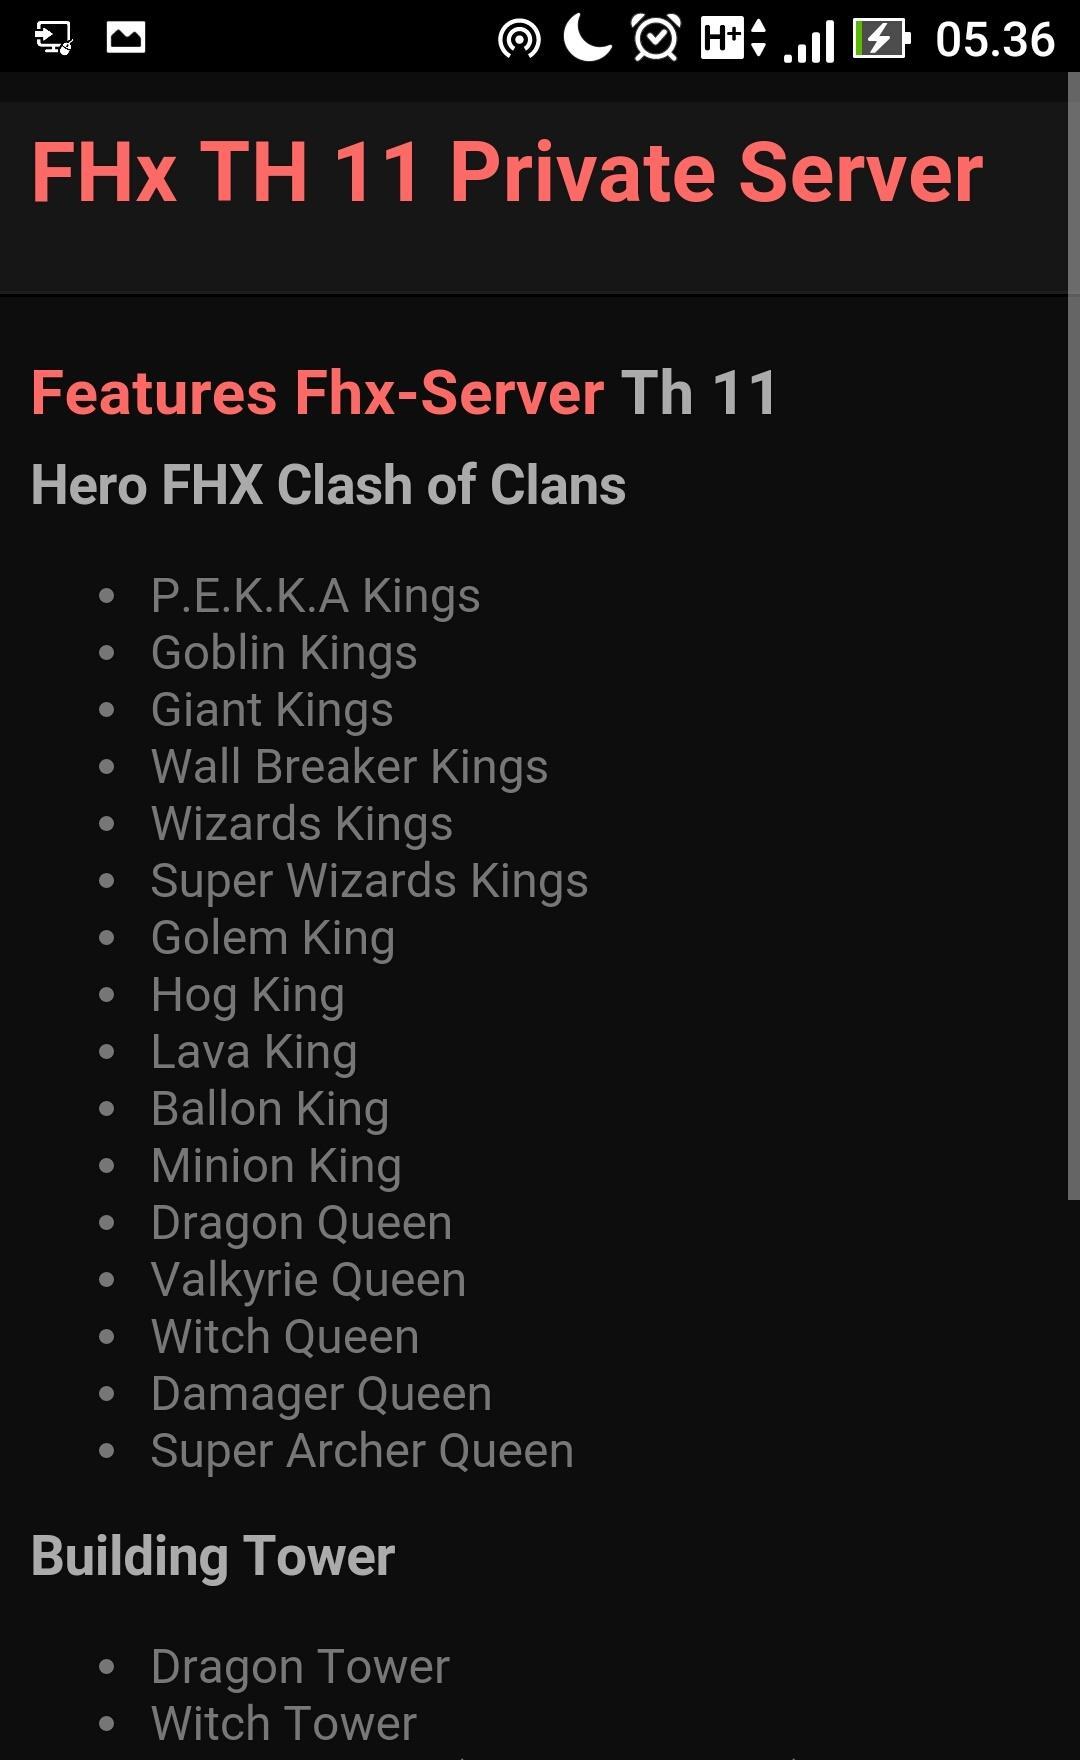 Fhx Th 11 Private Server COC for Android - APK Download